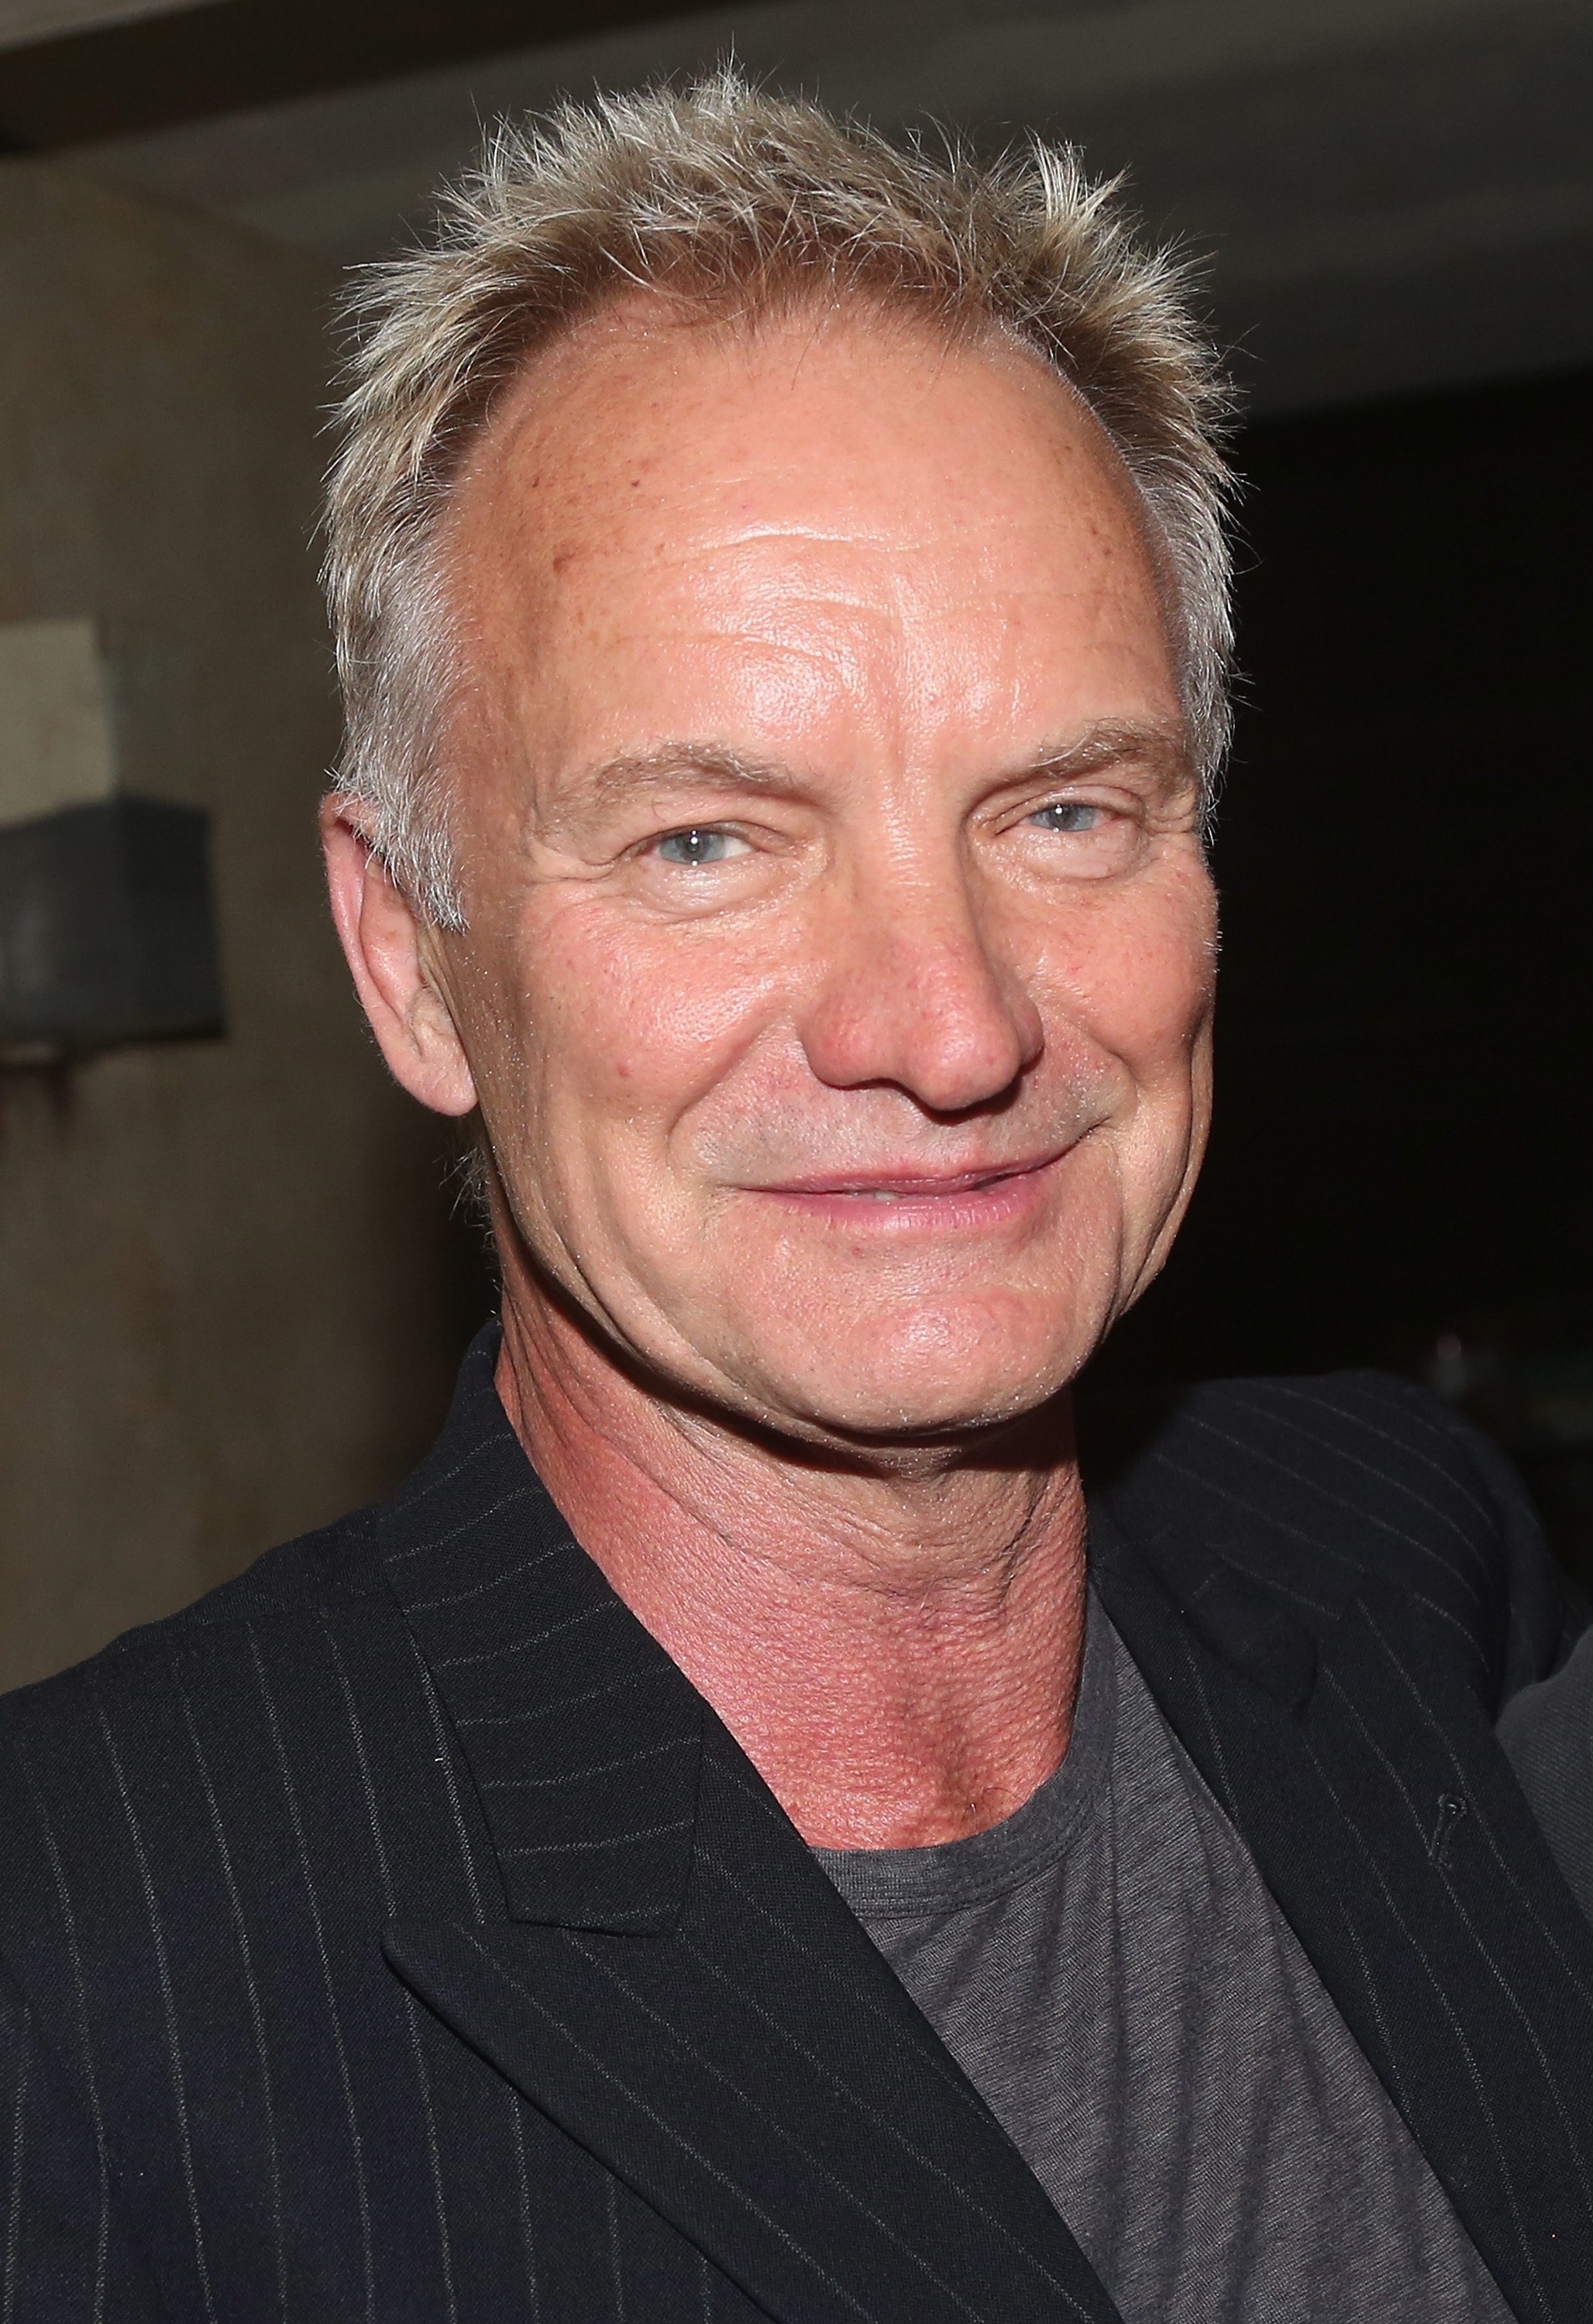 Sting poses backstage at the hit musical "The Band's Visit" on Broadway at The Barrymore Theatre in New York City on May 31, 2018. | Source: Getty Images